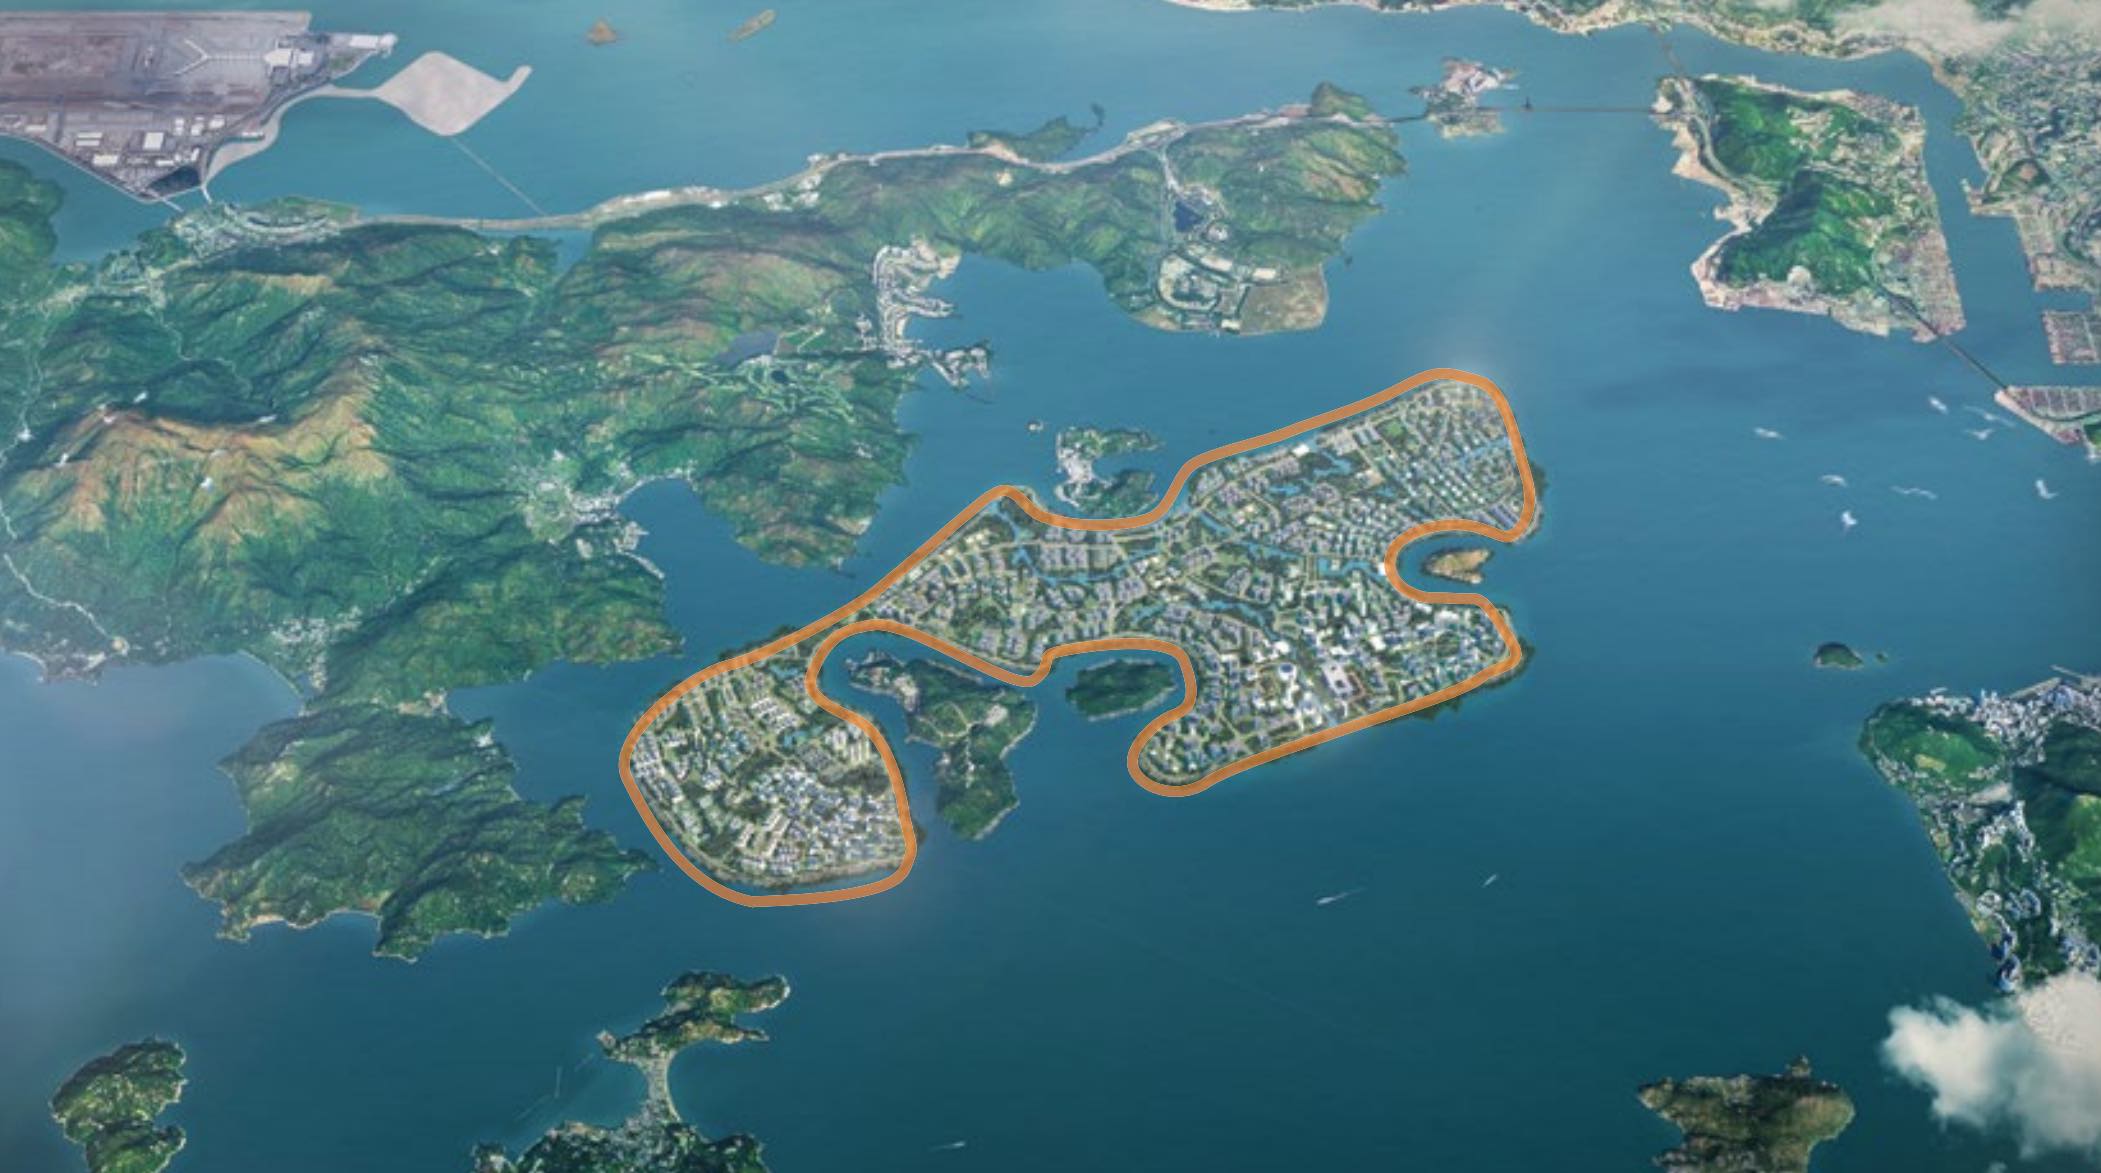 A rendering of the proposed 2200 hectare artificial island via Our Hong Kong Foundation